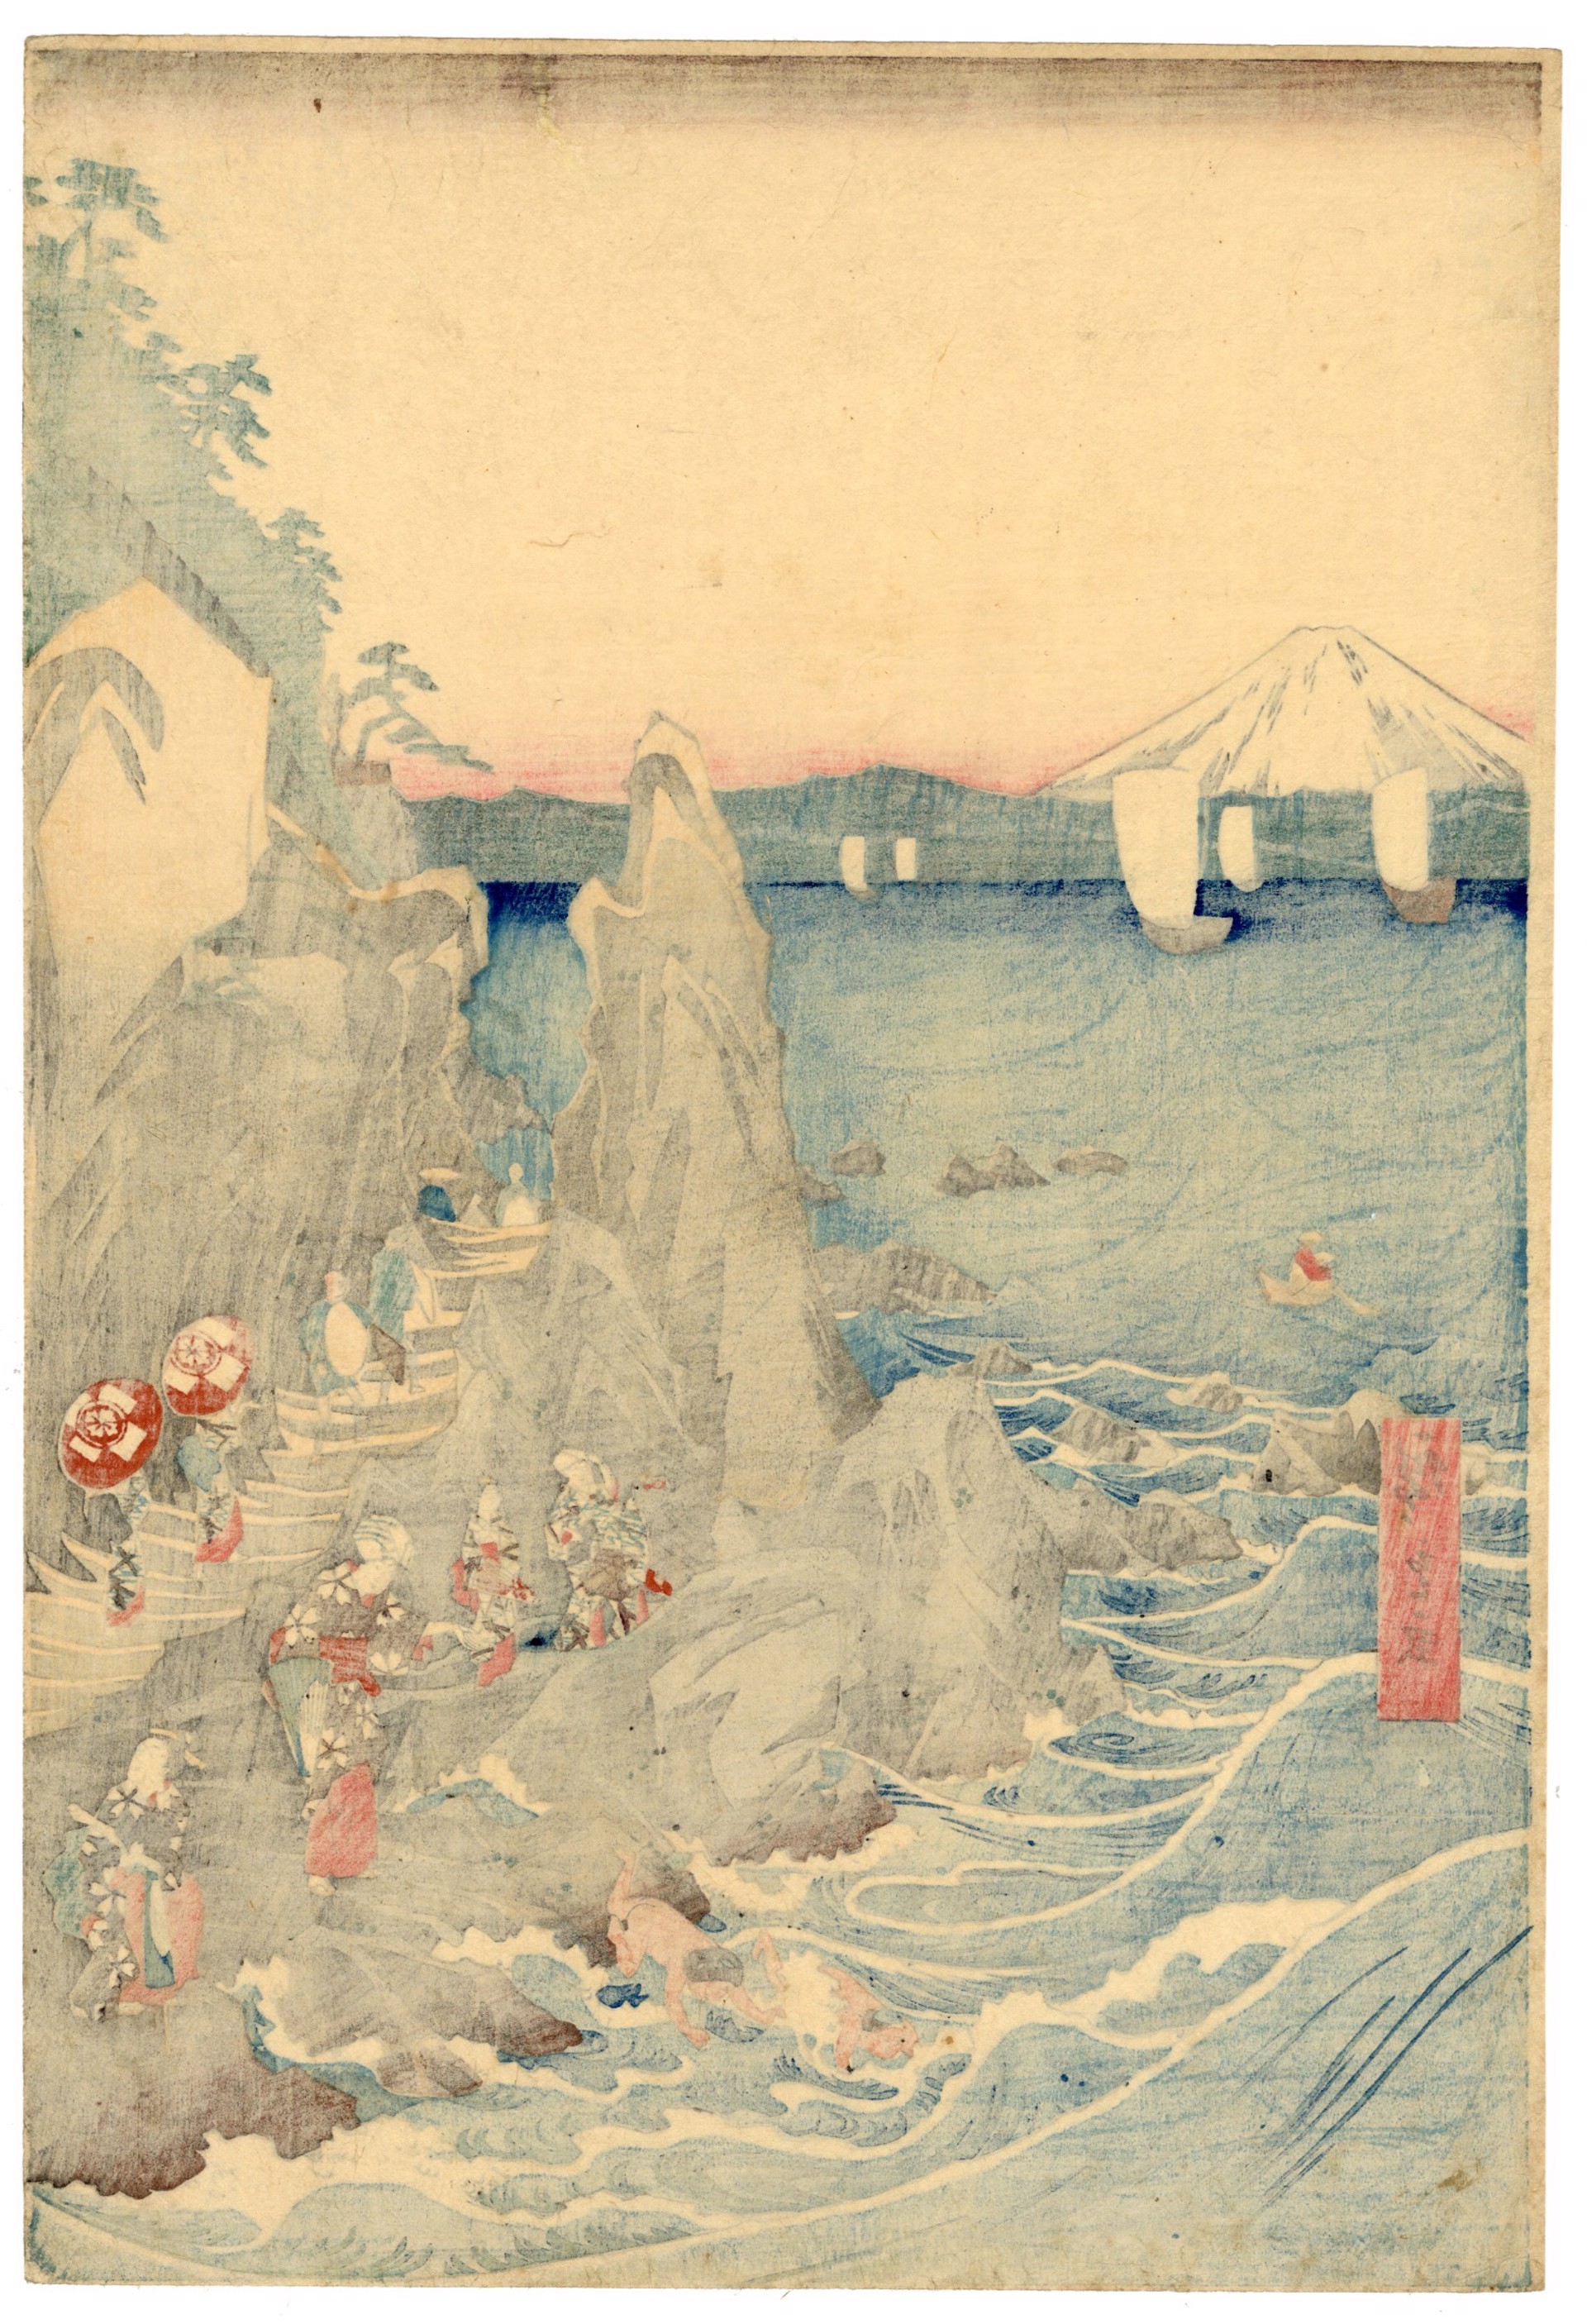 Pilgramage to the Original Shrine of Benten in the Cave at Enoshima, Sagami Province by Hiroshige